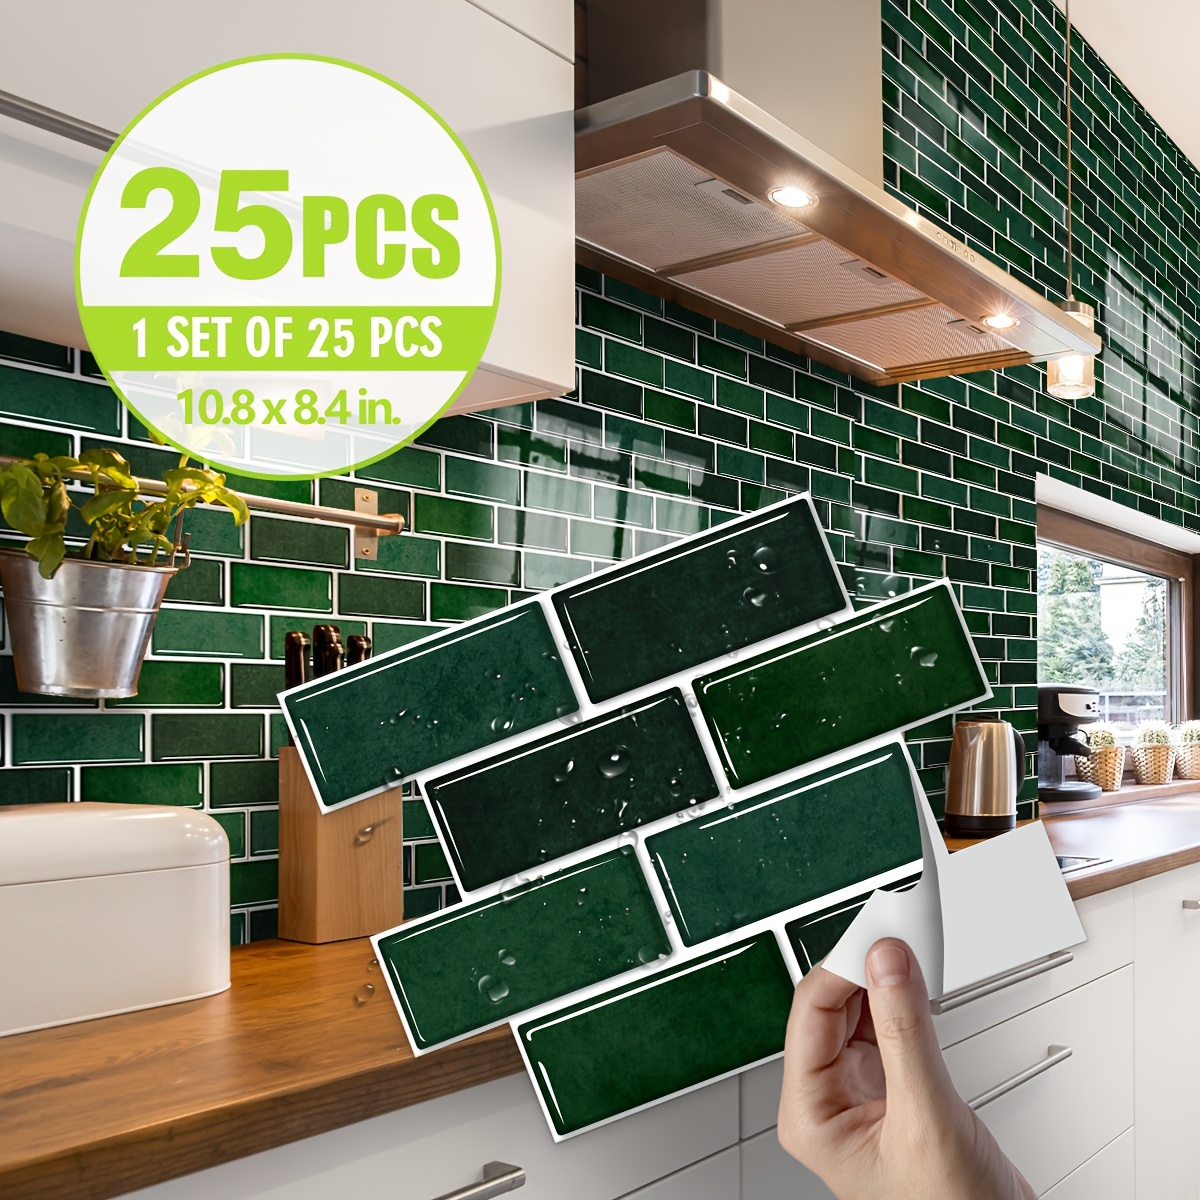 

25pcs, Deep Green Marble Pattern Kitchen Tiles, Waterproof Oil-proof Self-adhesive Peel & Stick Wall Tile, Thickened Moisture-resistant Vinyl Tiles For Kitchen & Bathroom